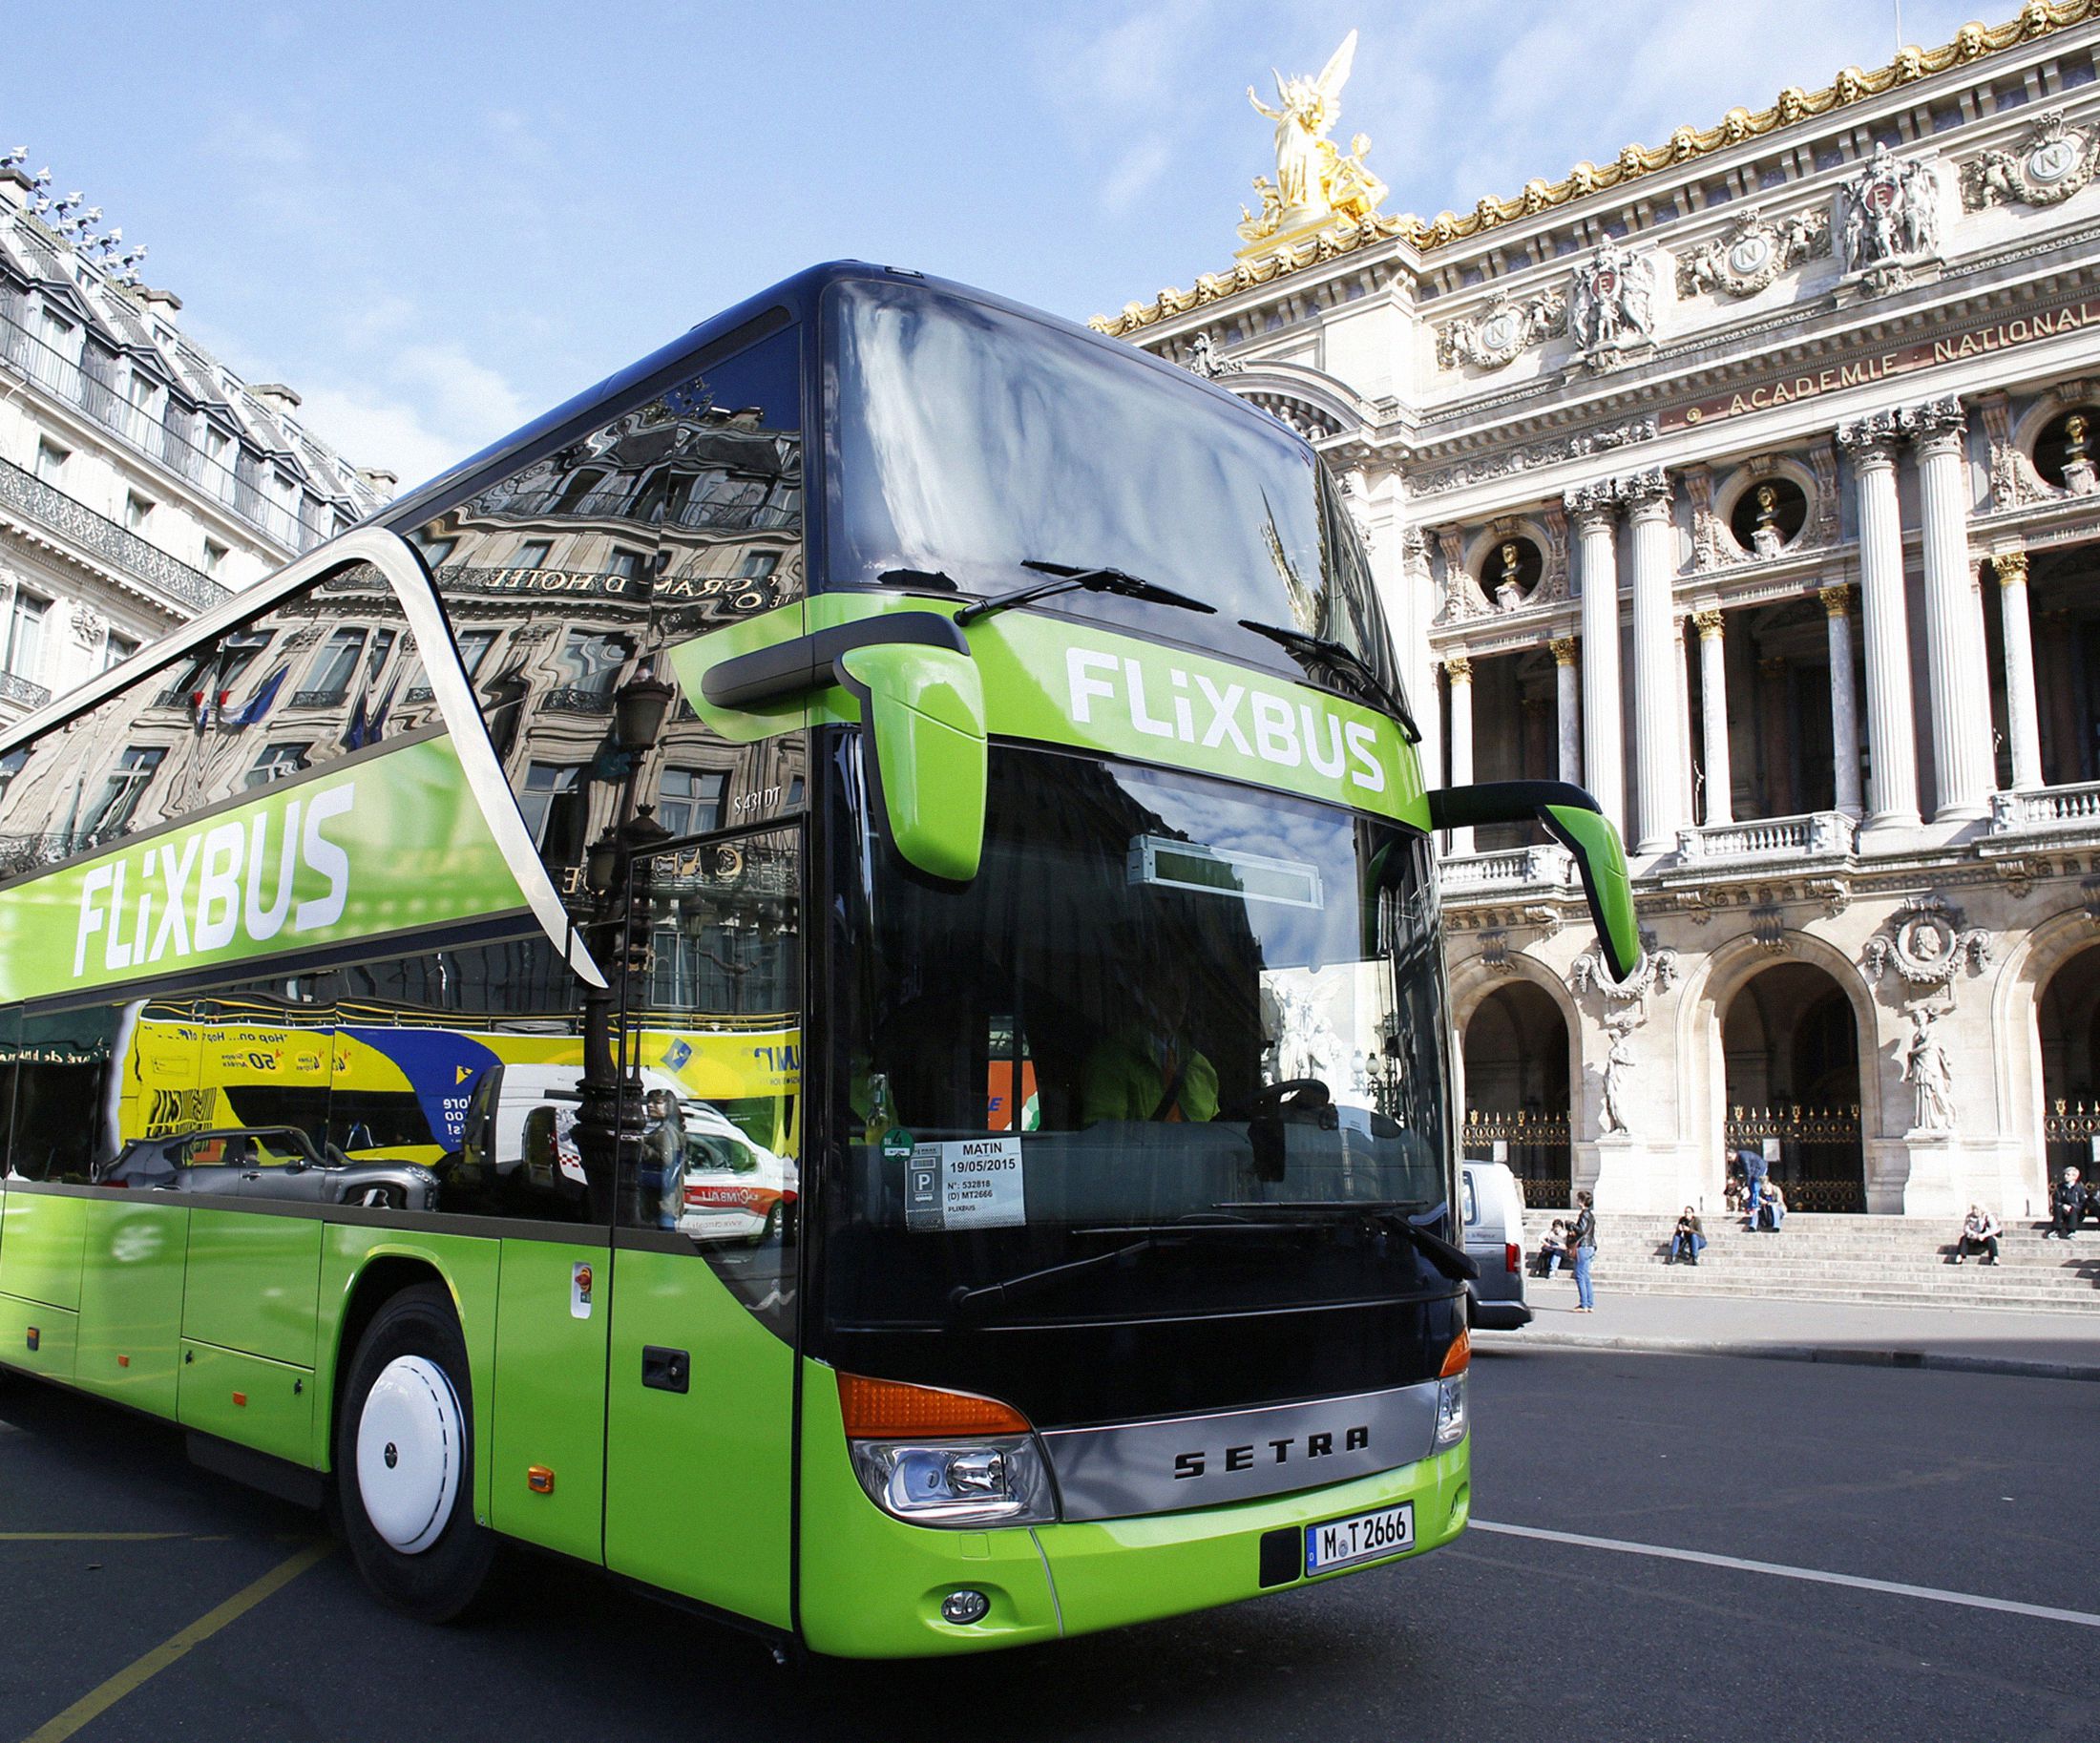 FlixBus Conquered Europe. Now It's Coming to America   Bloomberg